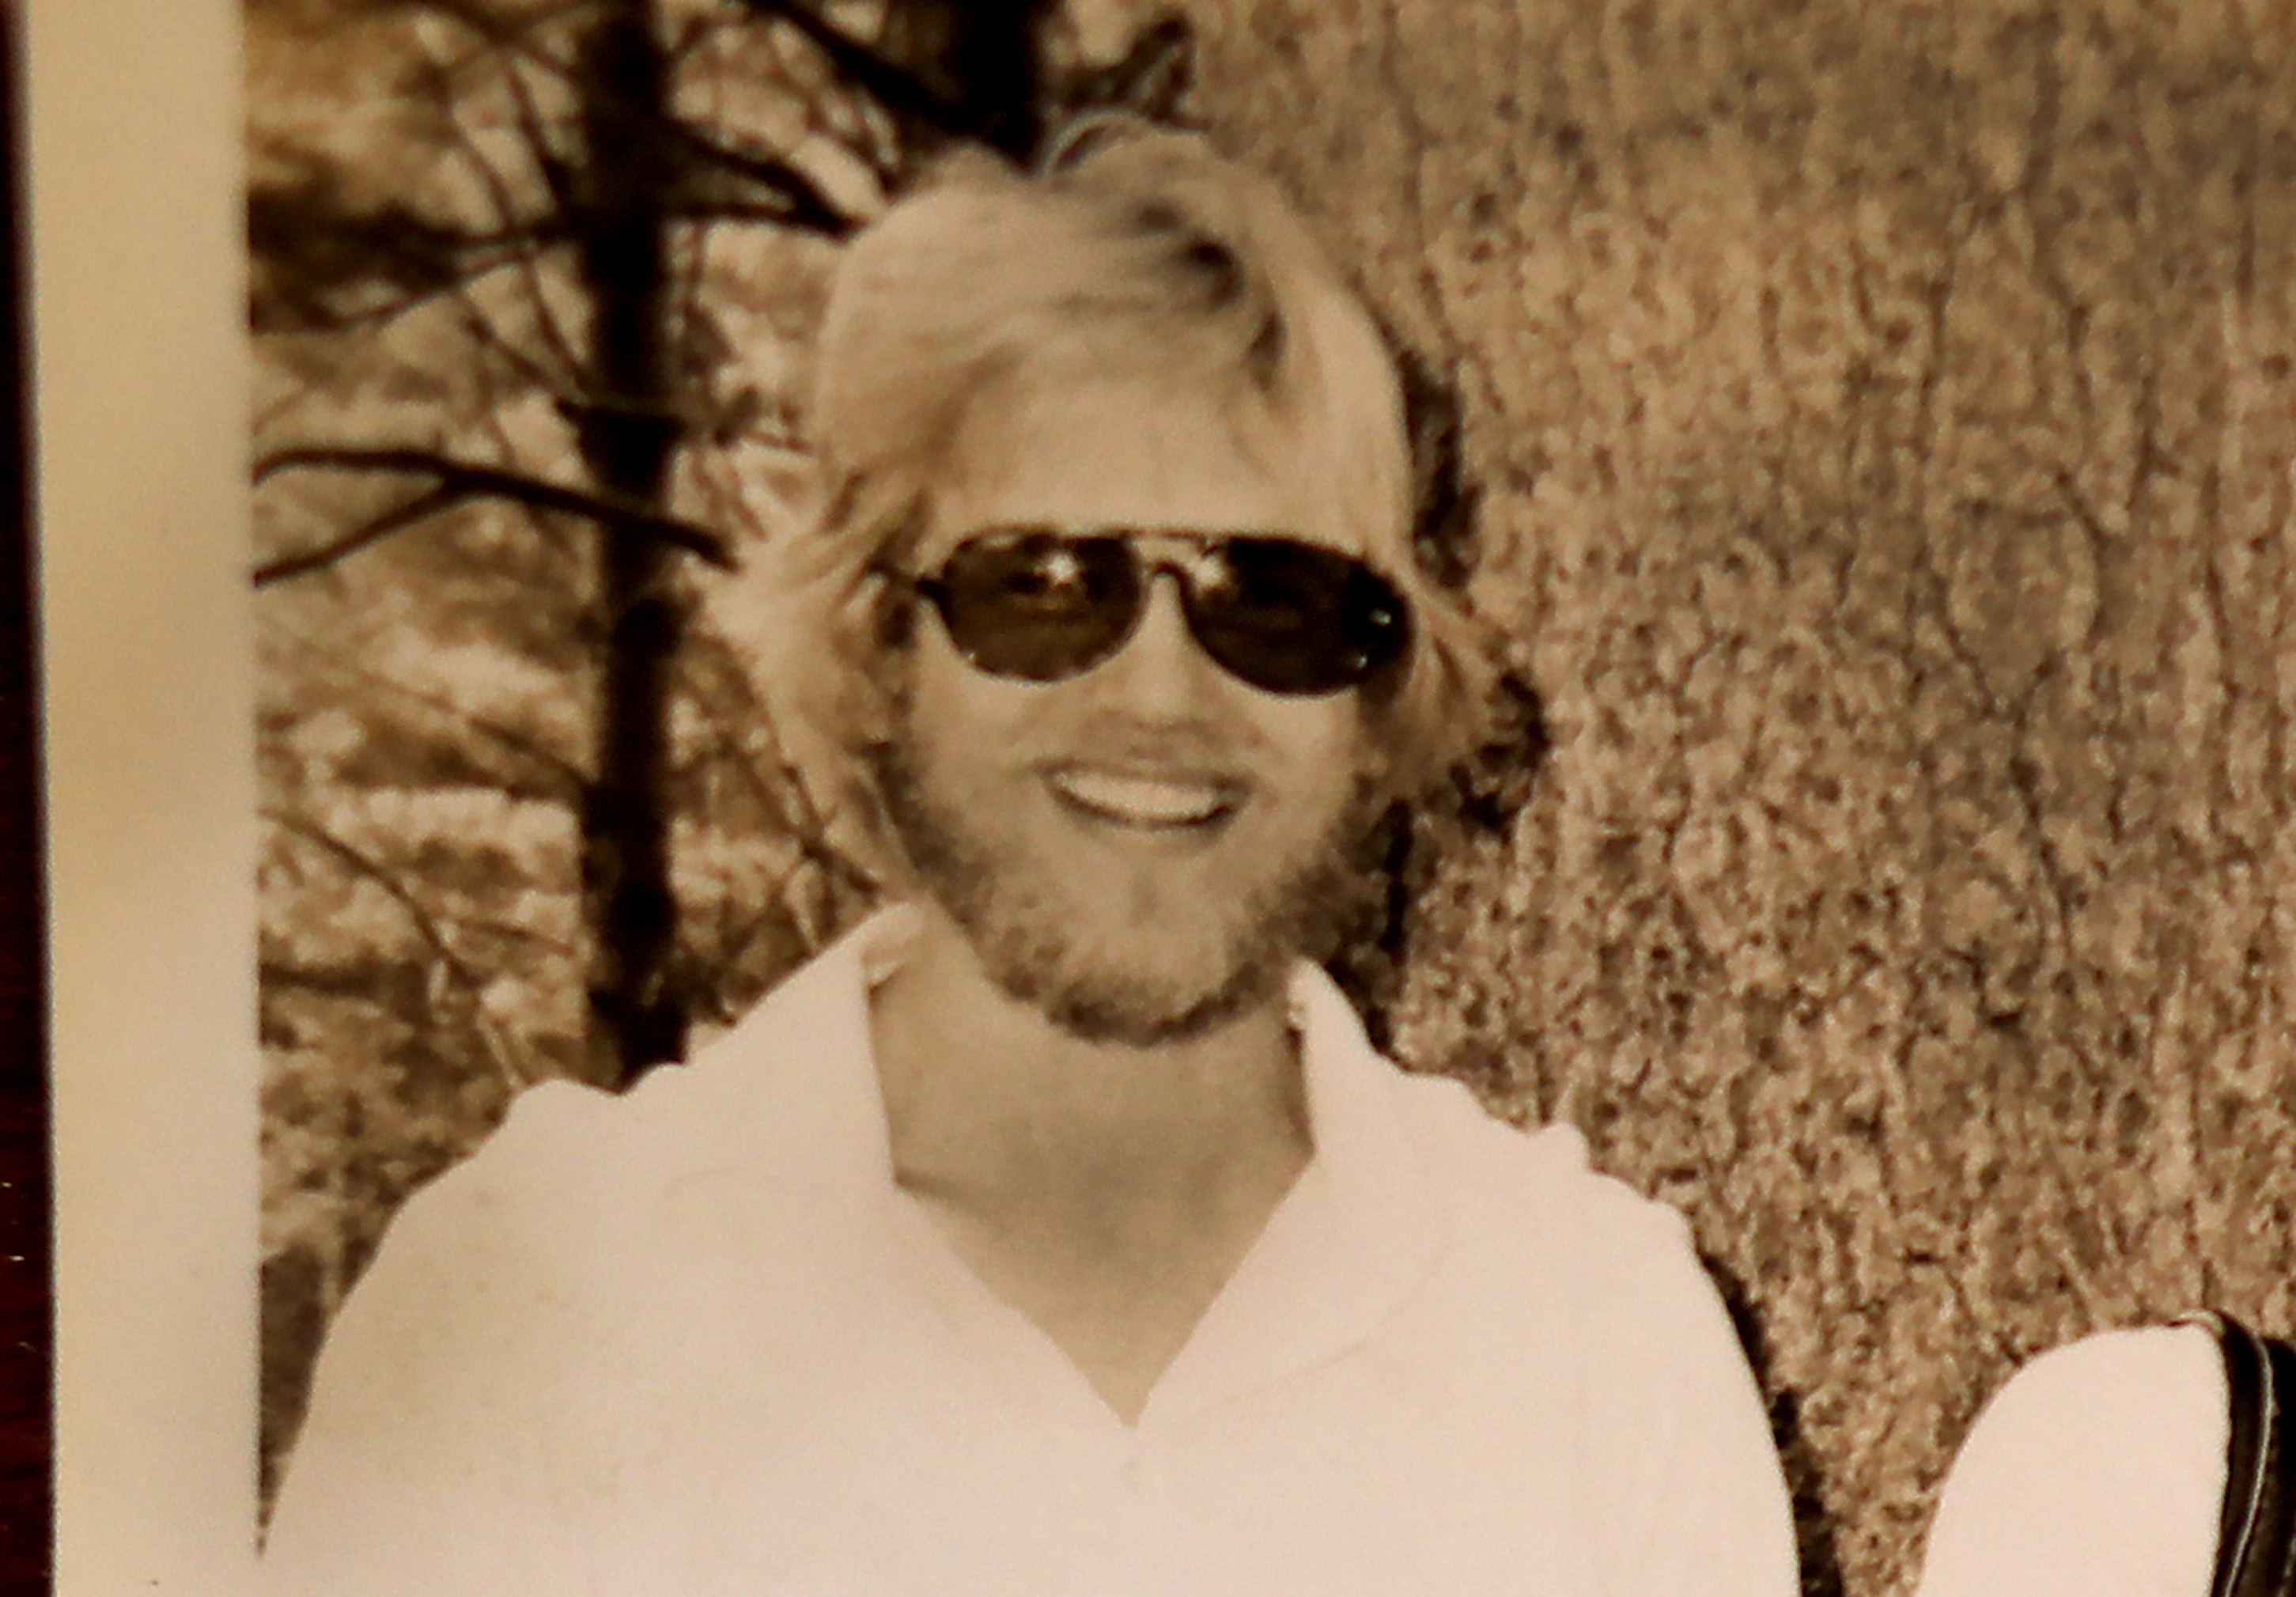 Tom Randele had a full beard when he worked at the Pembroke Country Club.